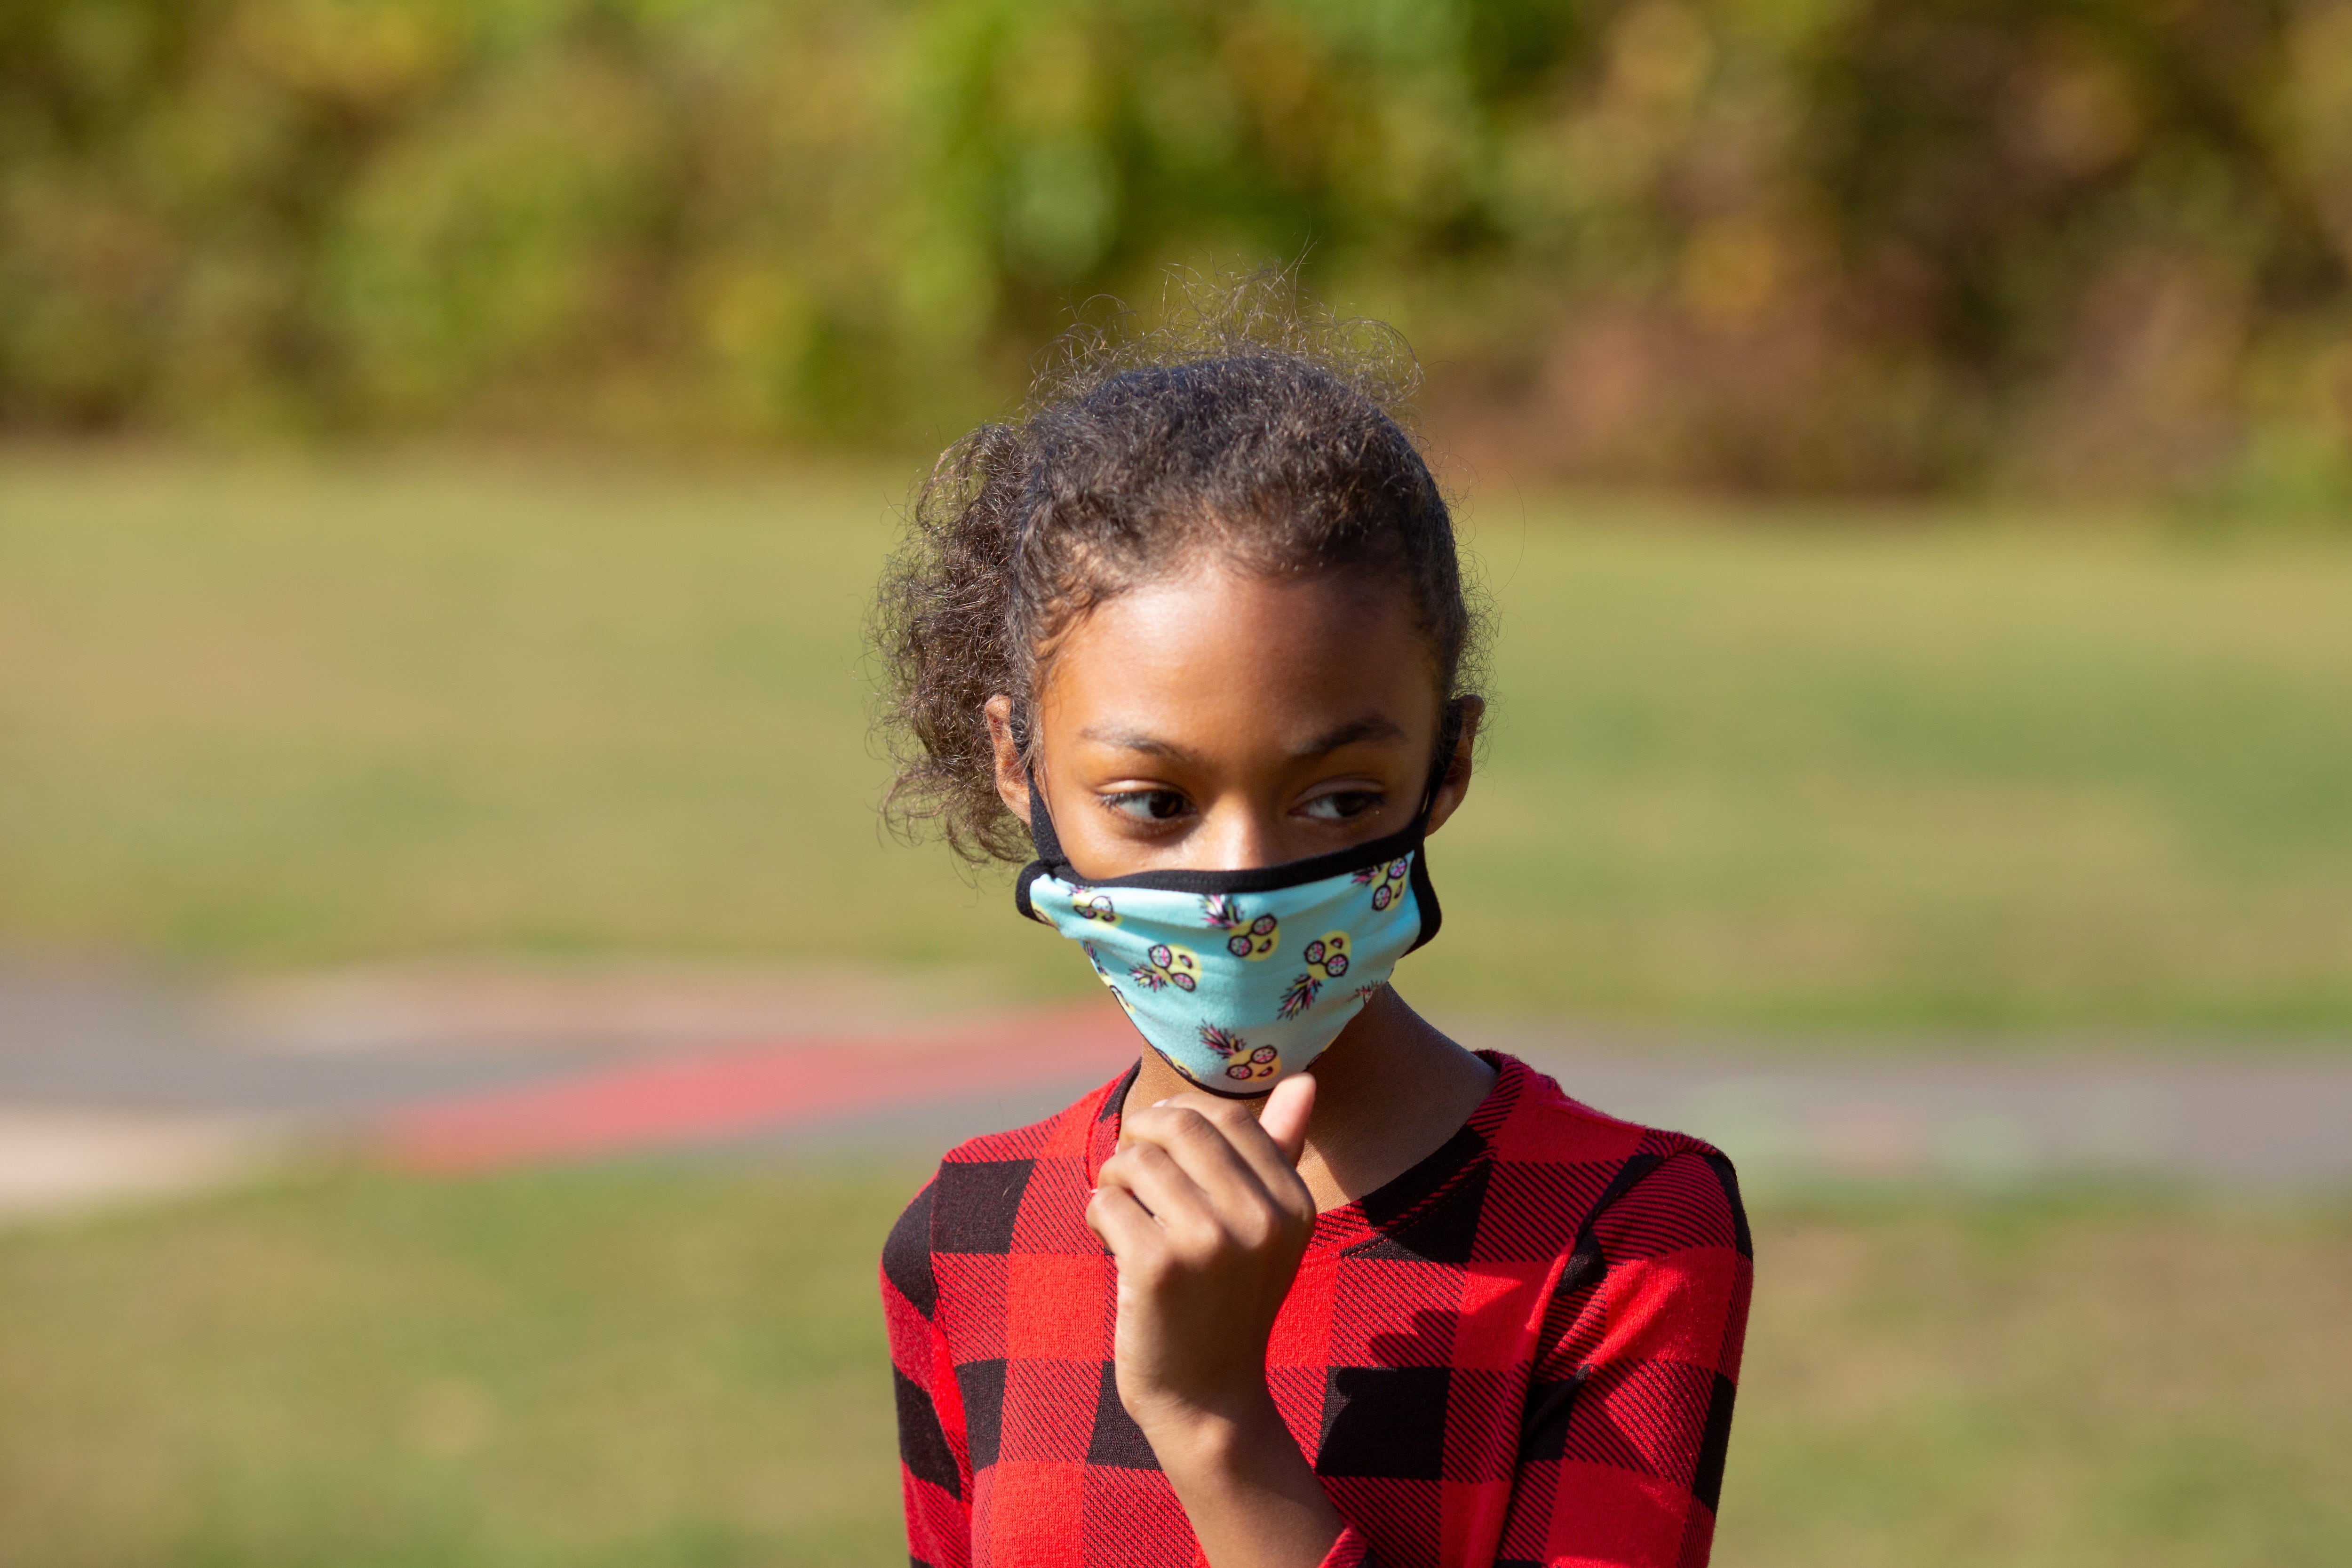 Students in Mr. Wolfram’s fifth grade class take a mask break on the school field at Wesley Elementary School in Middletown, CT, October 5, 2020.